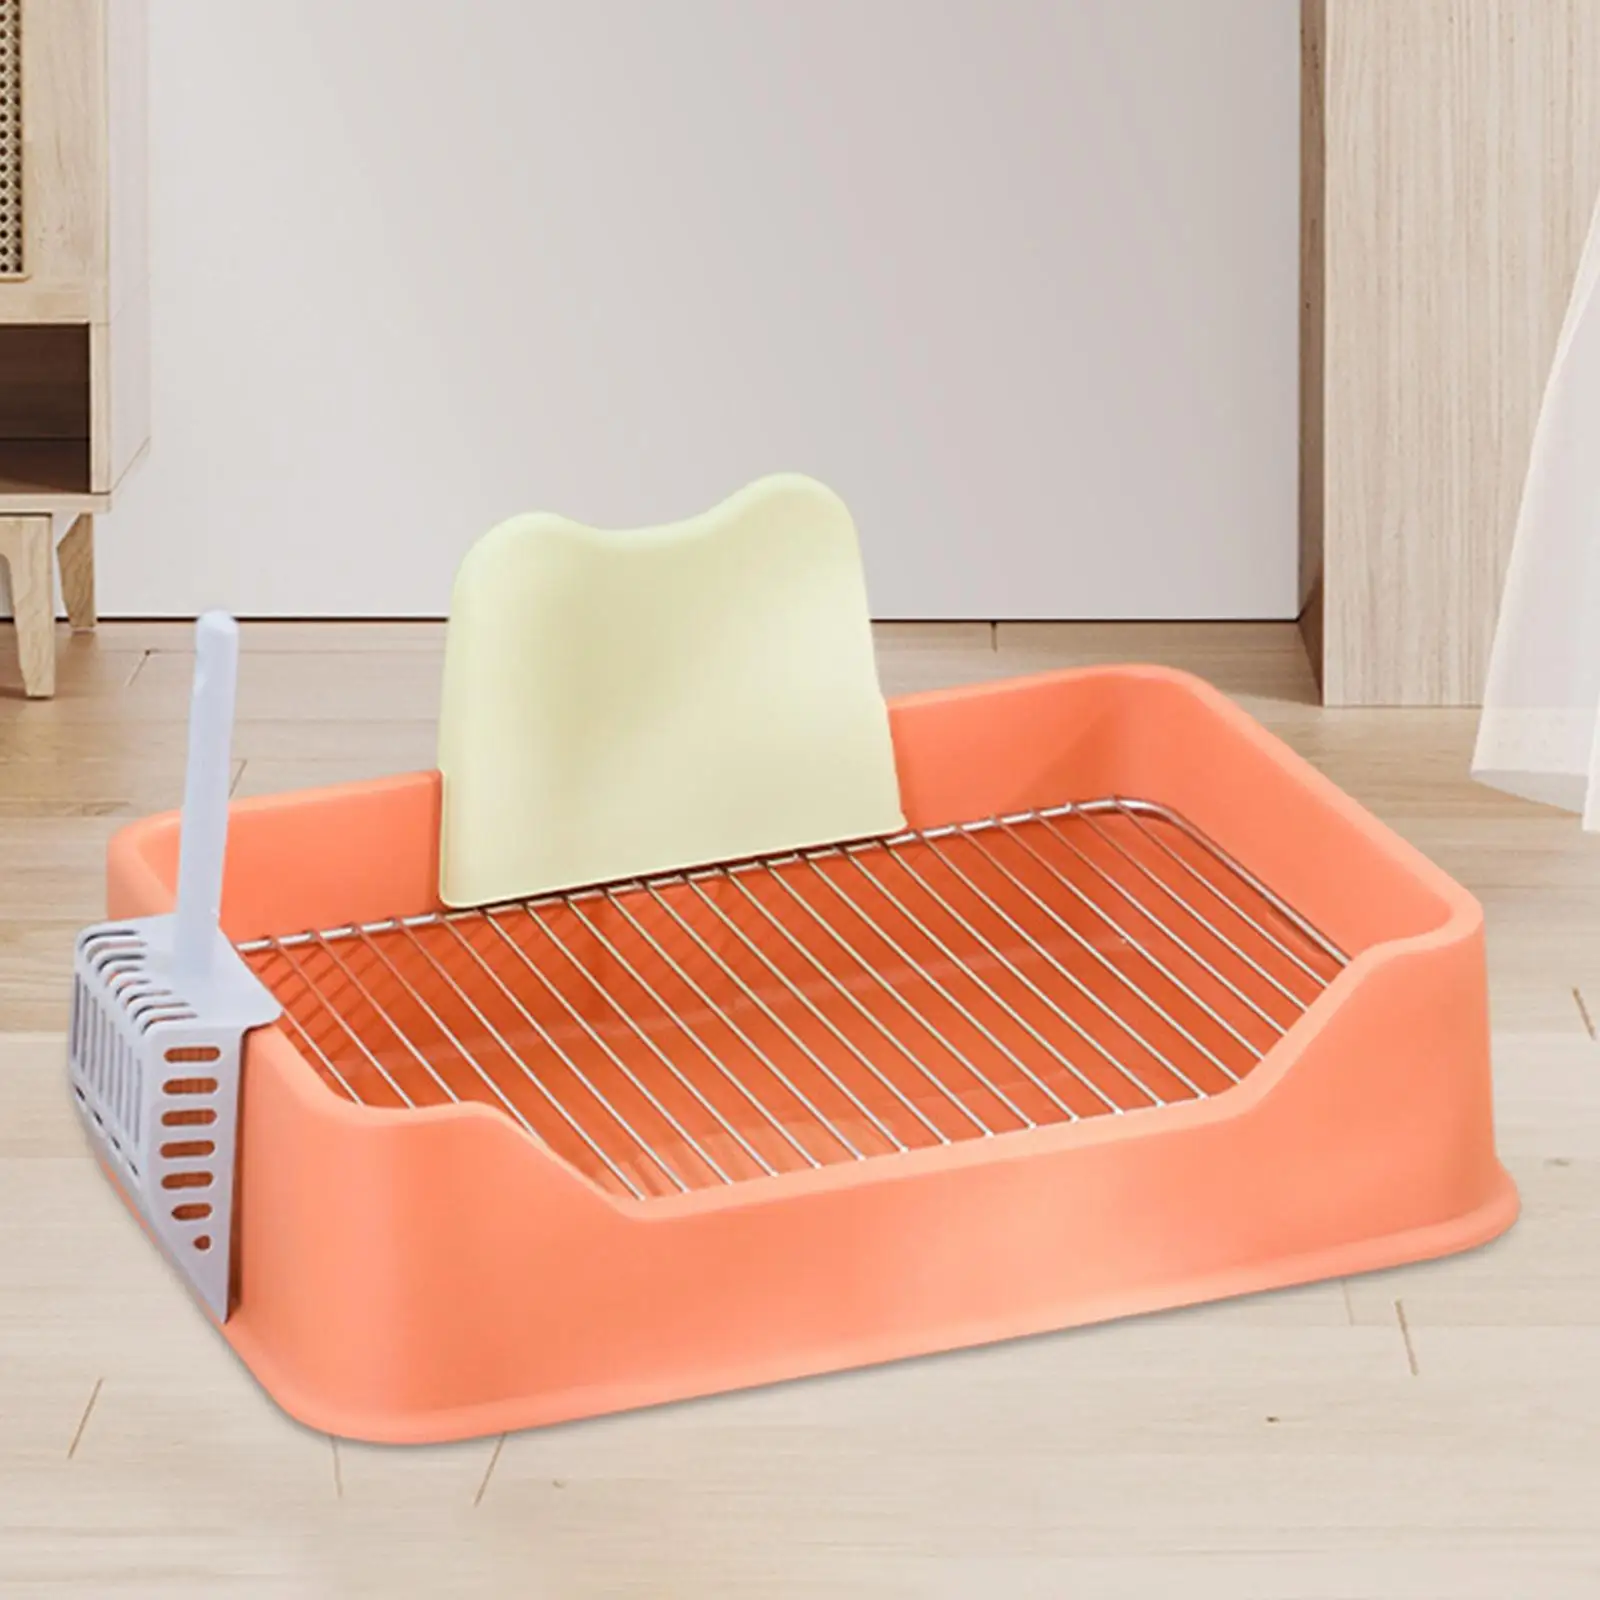 Dog Toilet Puppy Potty Tray Pet Supplies for Indoor Cats Cleaning Tool Portable Anti Splashing Litter Box Puppy Training Tray